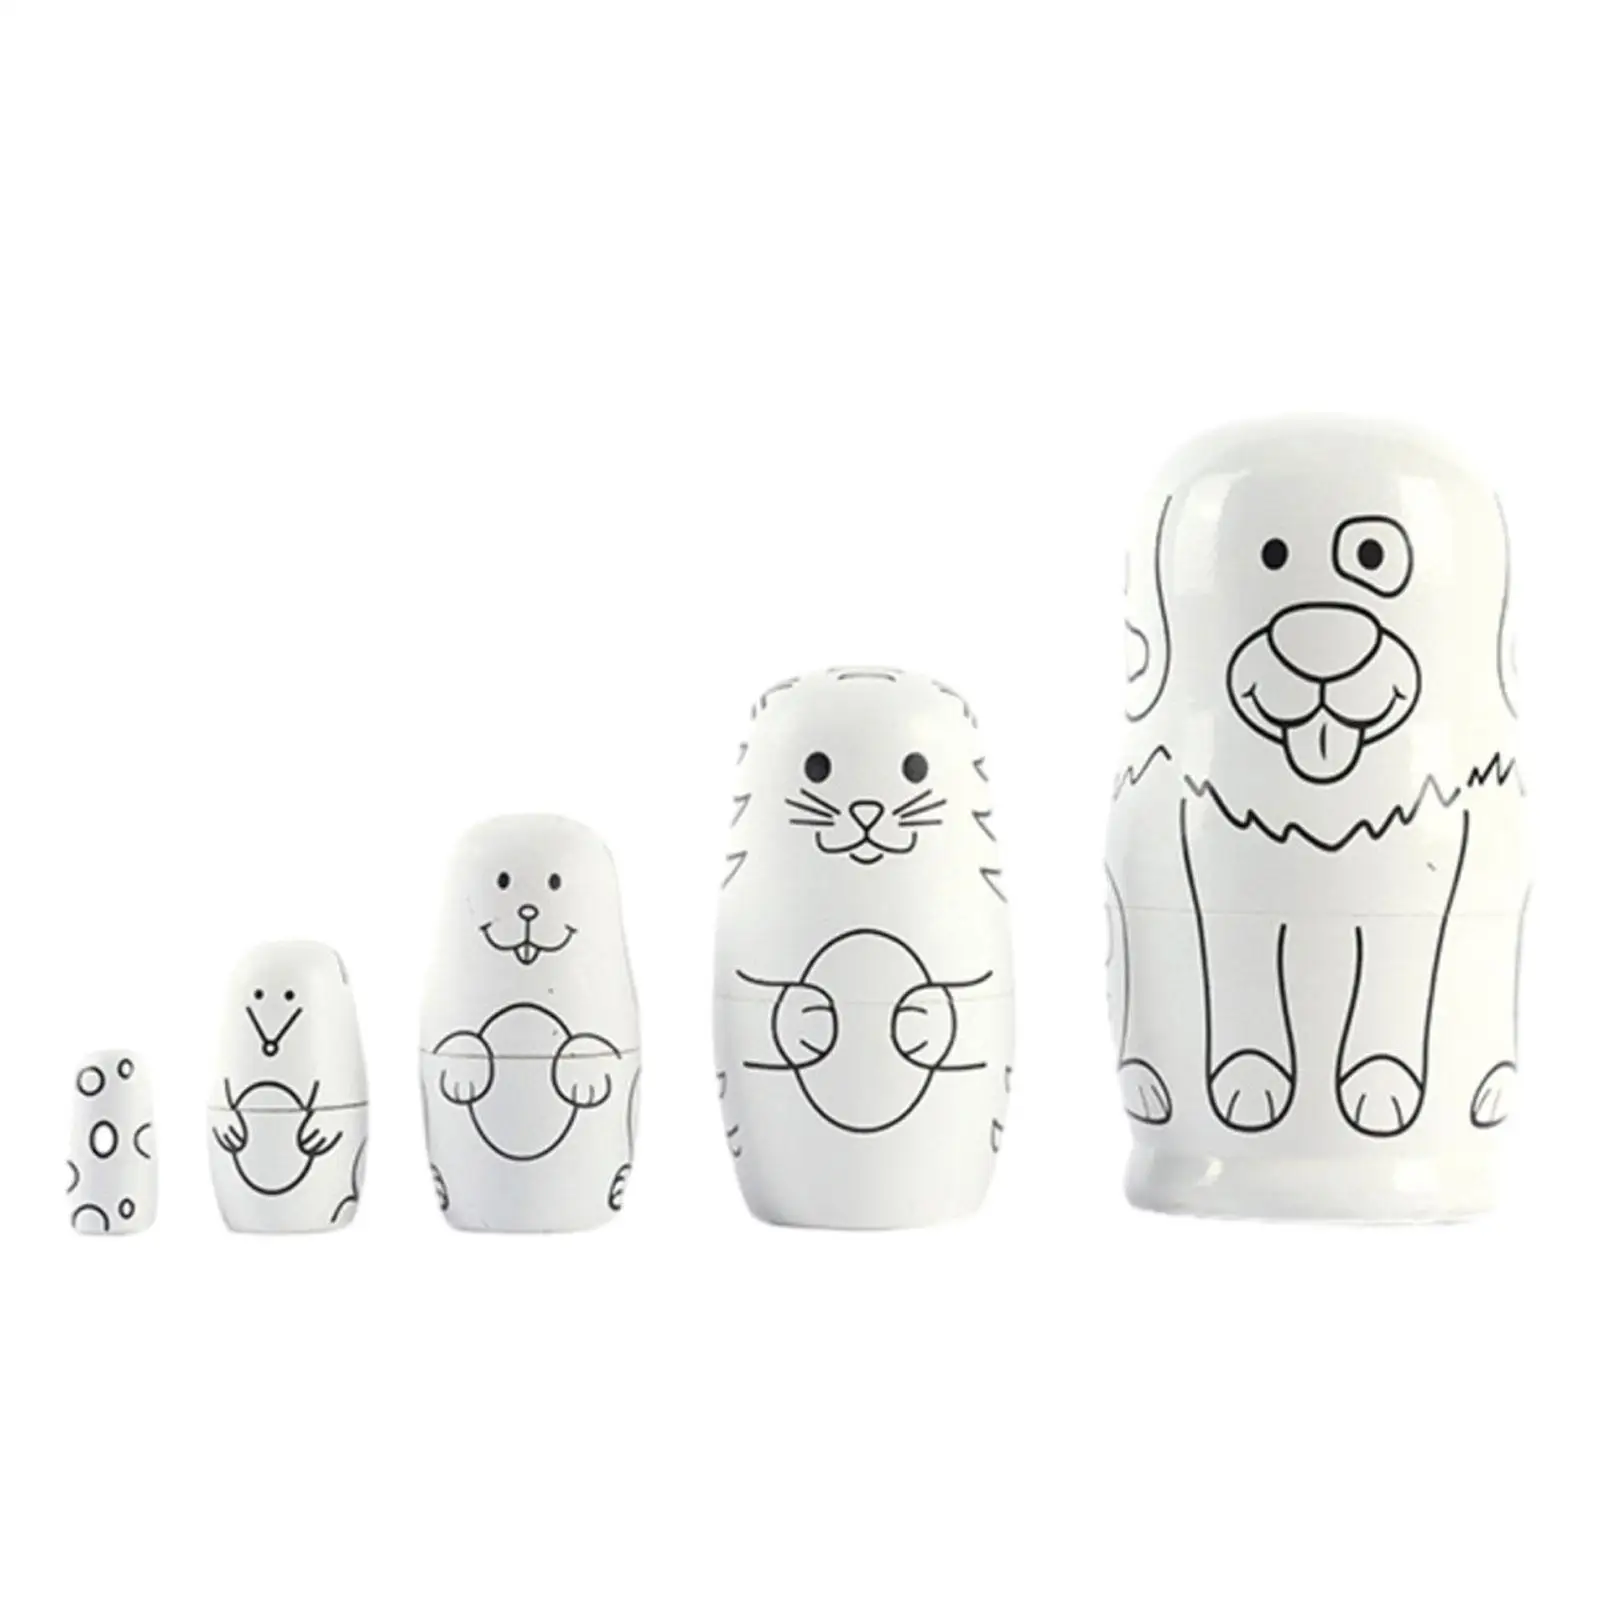 5x Russian Dolls Multipurpose Child Room Decoration Paintings Manually Done Housewarming Gifts Collectible Dolls Children Kids